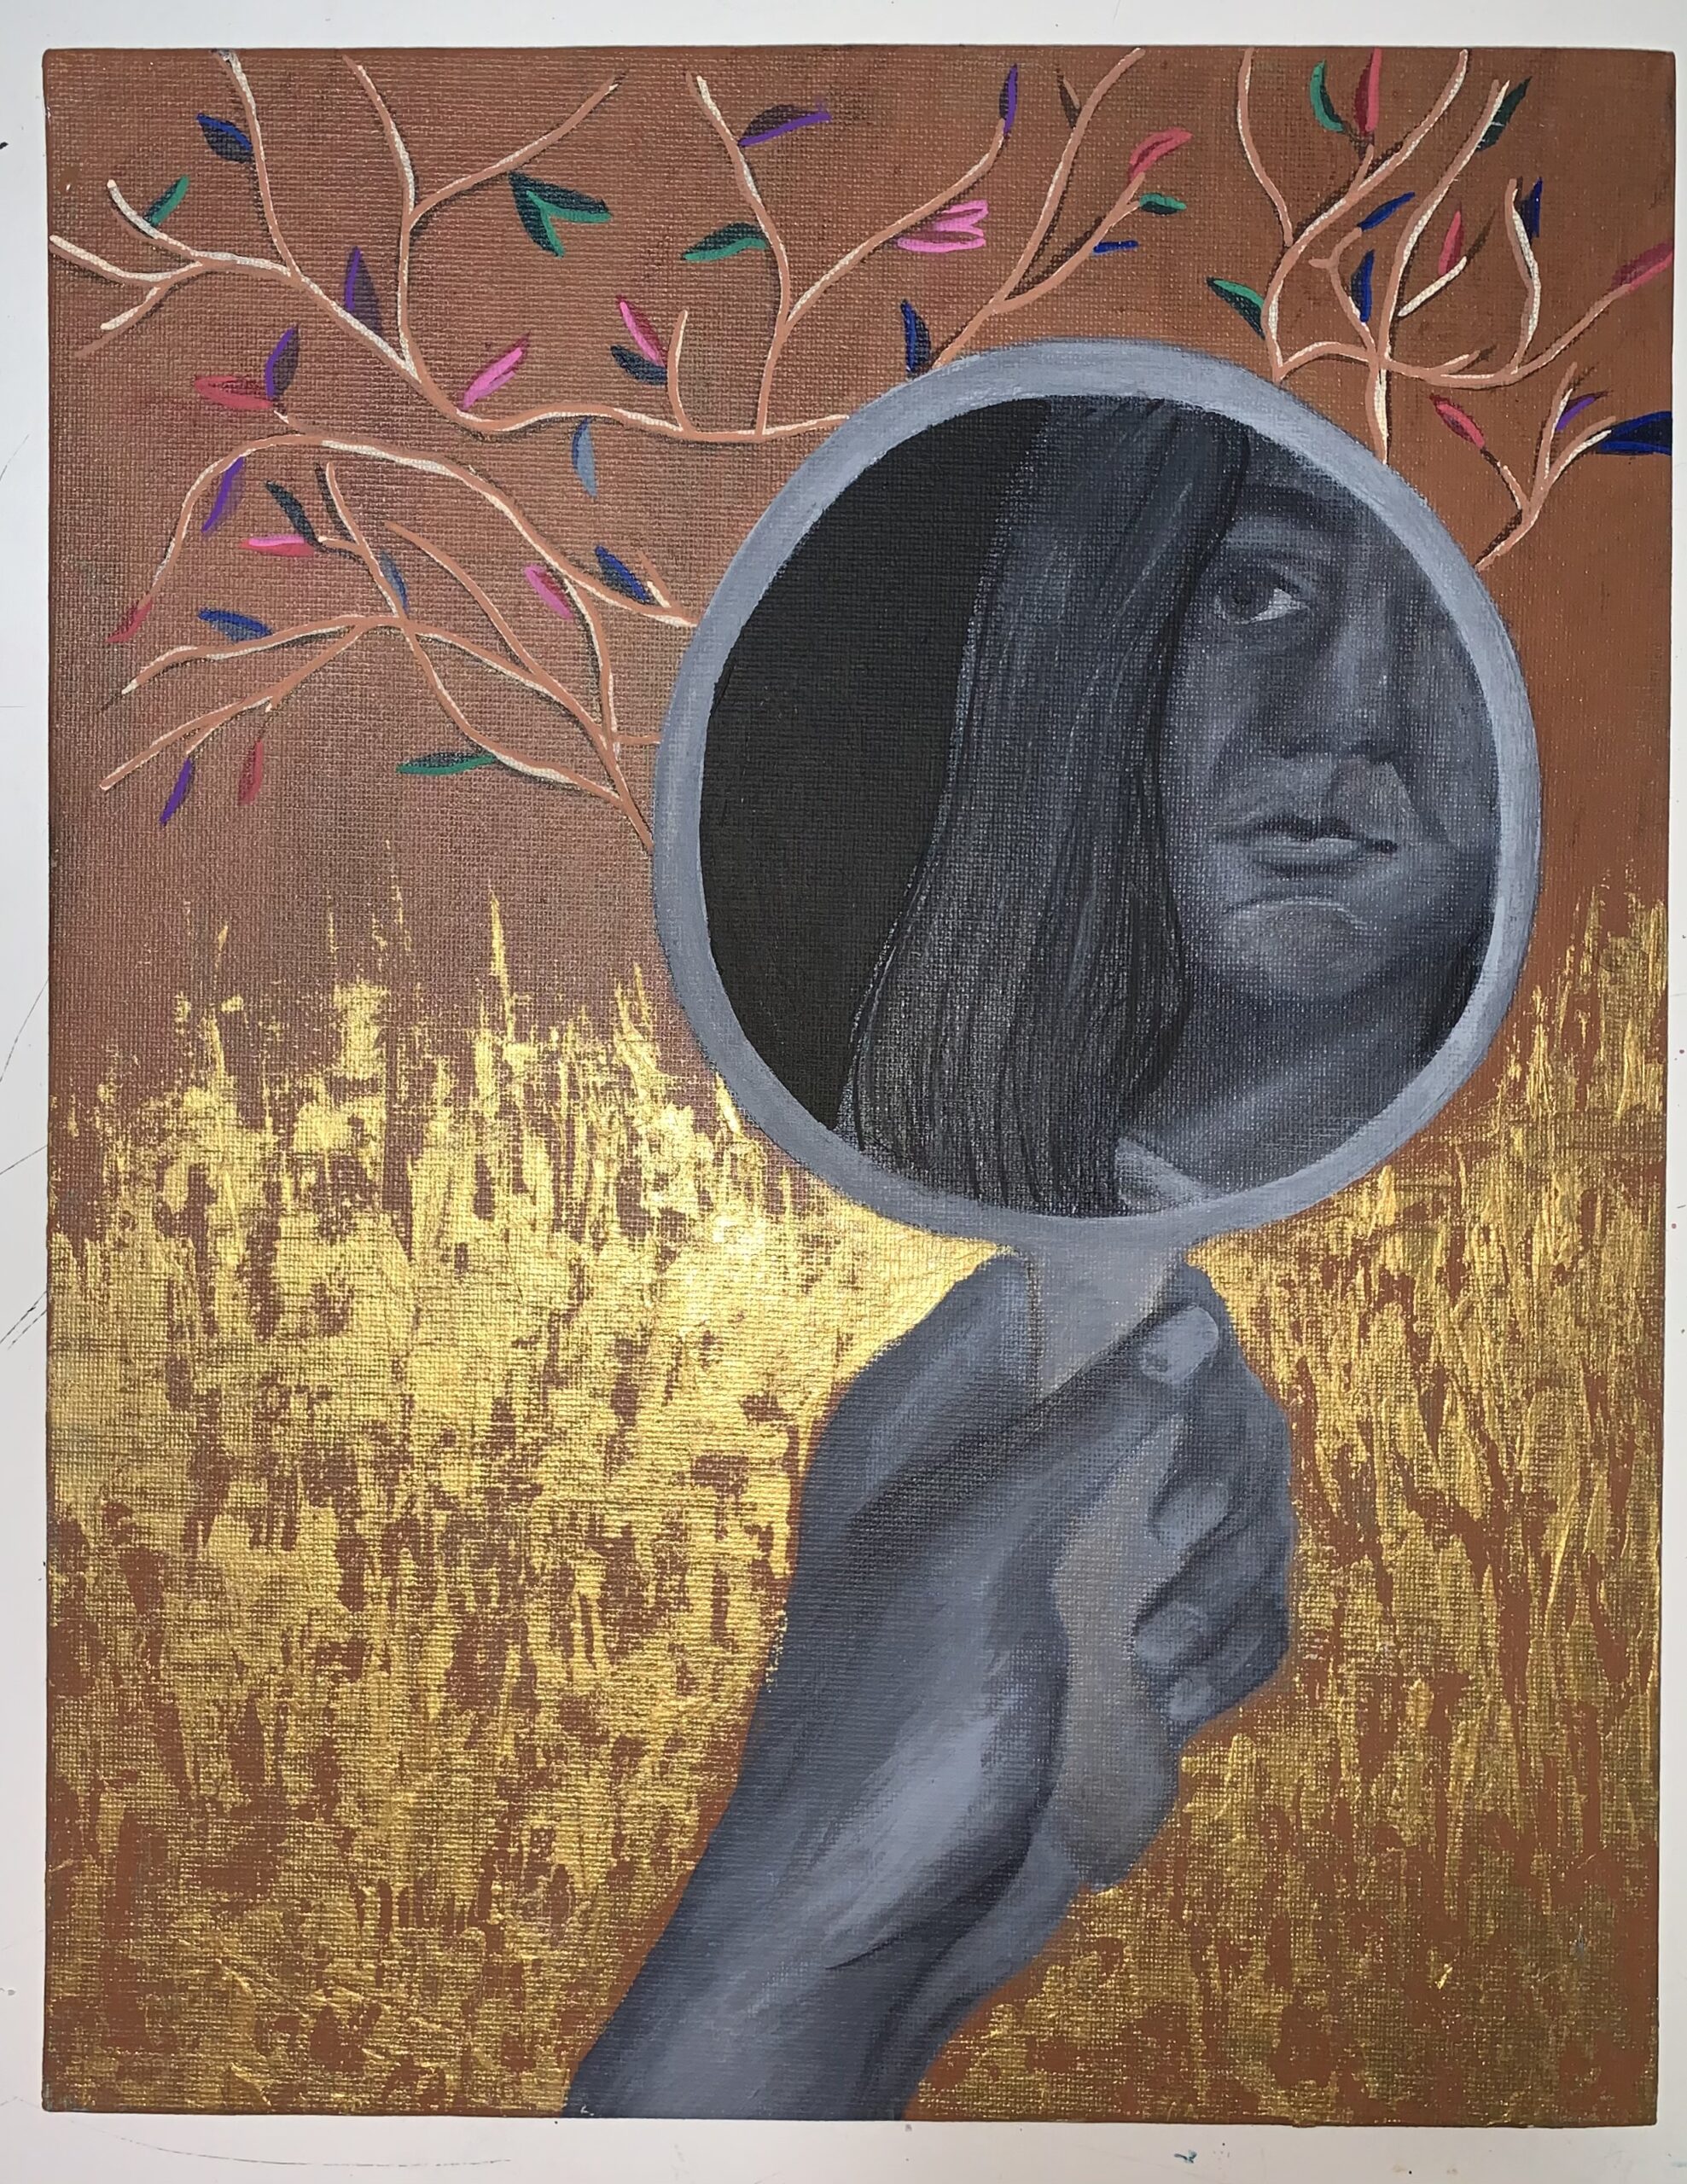 A girls is holding a hand-held mirror painted in greyscale. The background consists of a gold and brown tree.